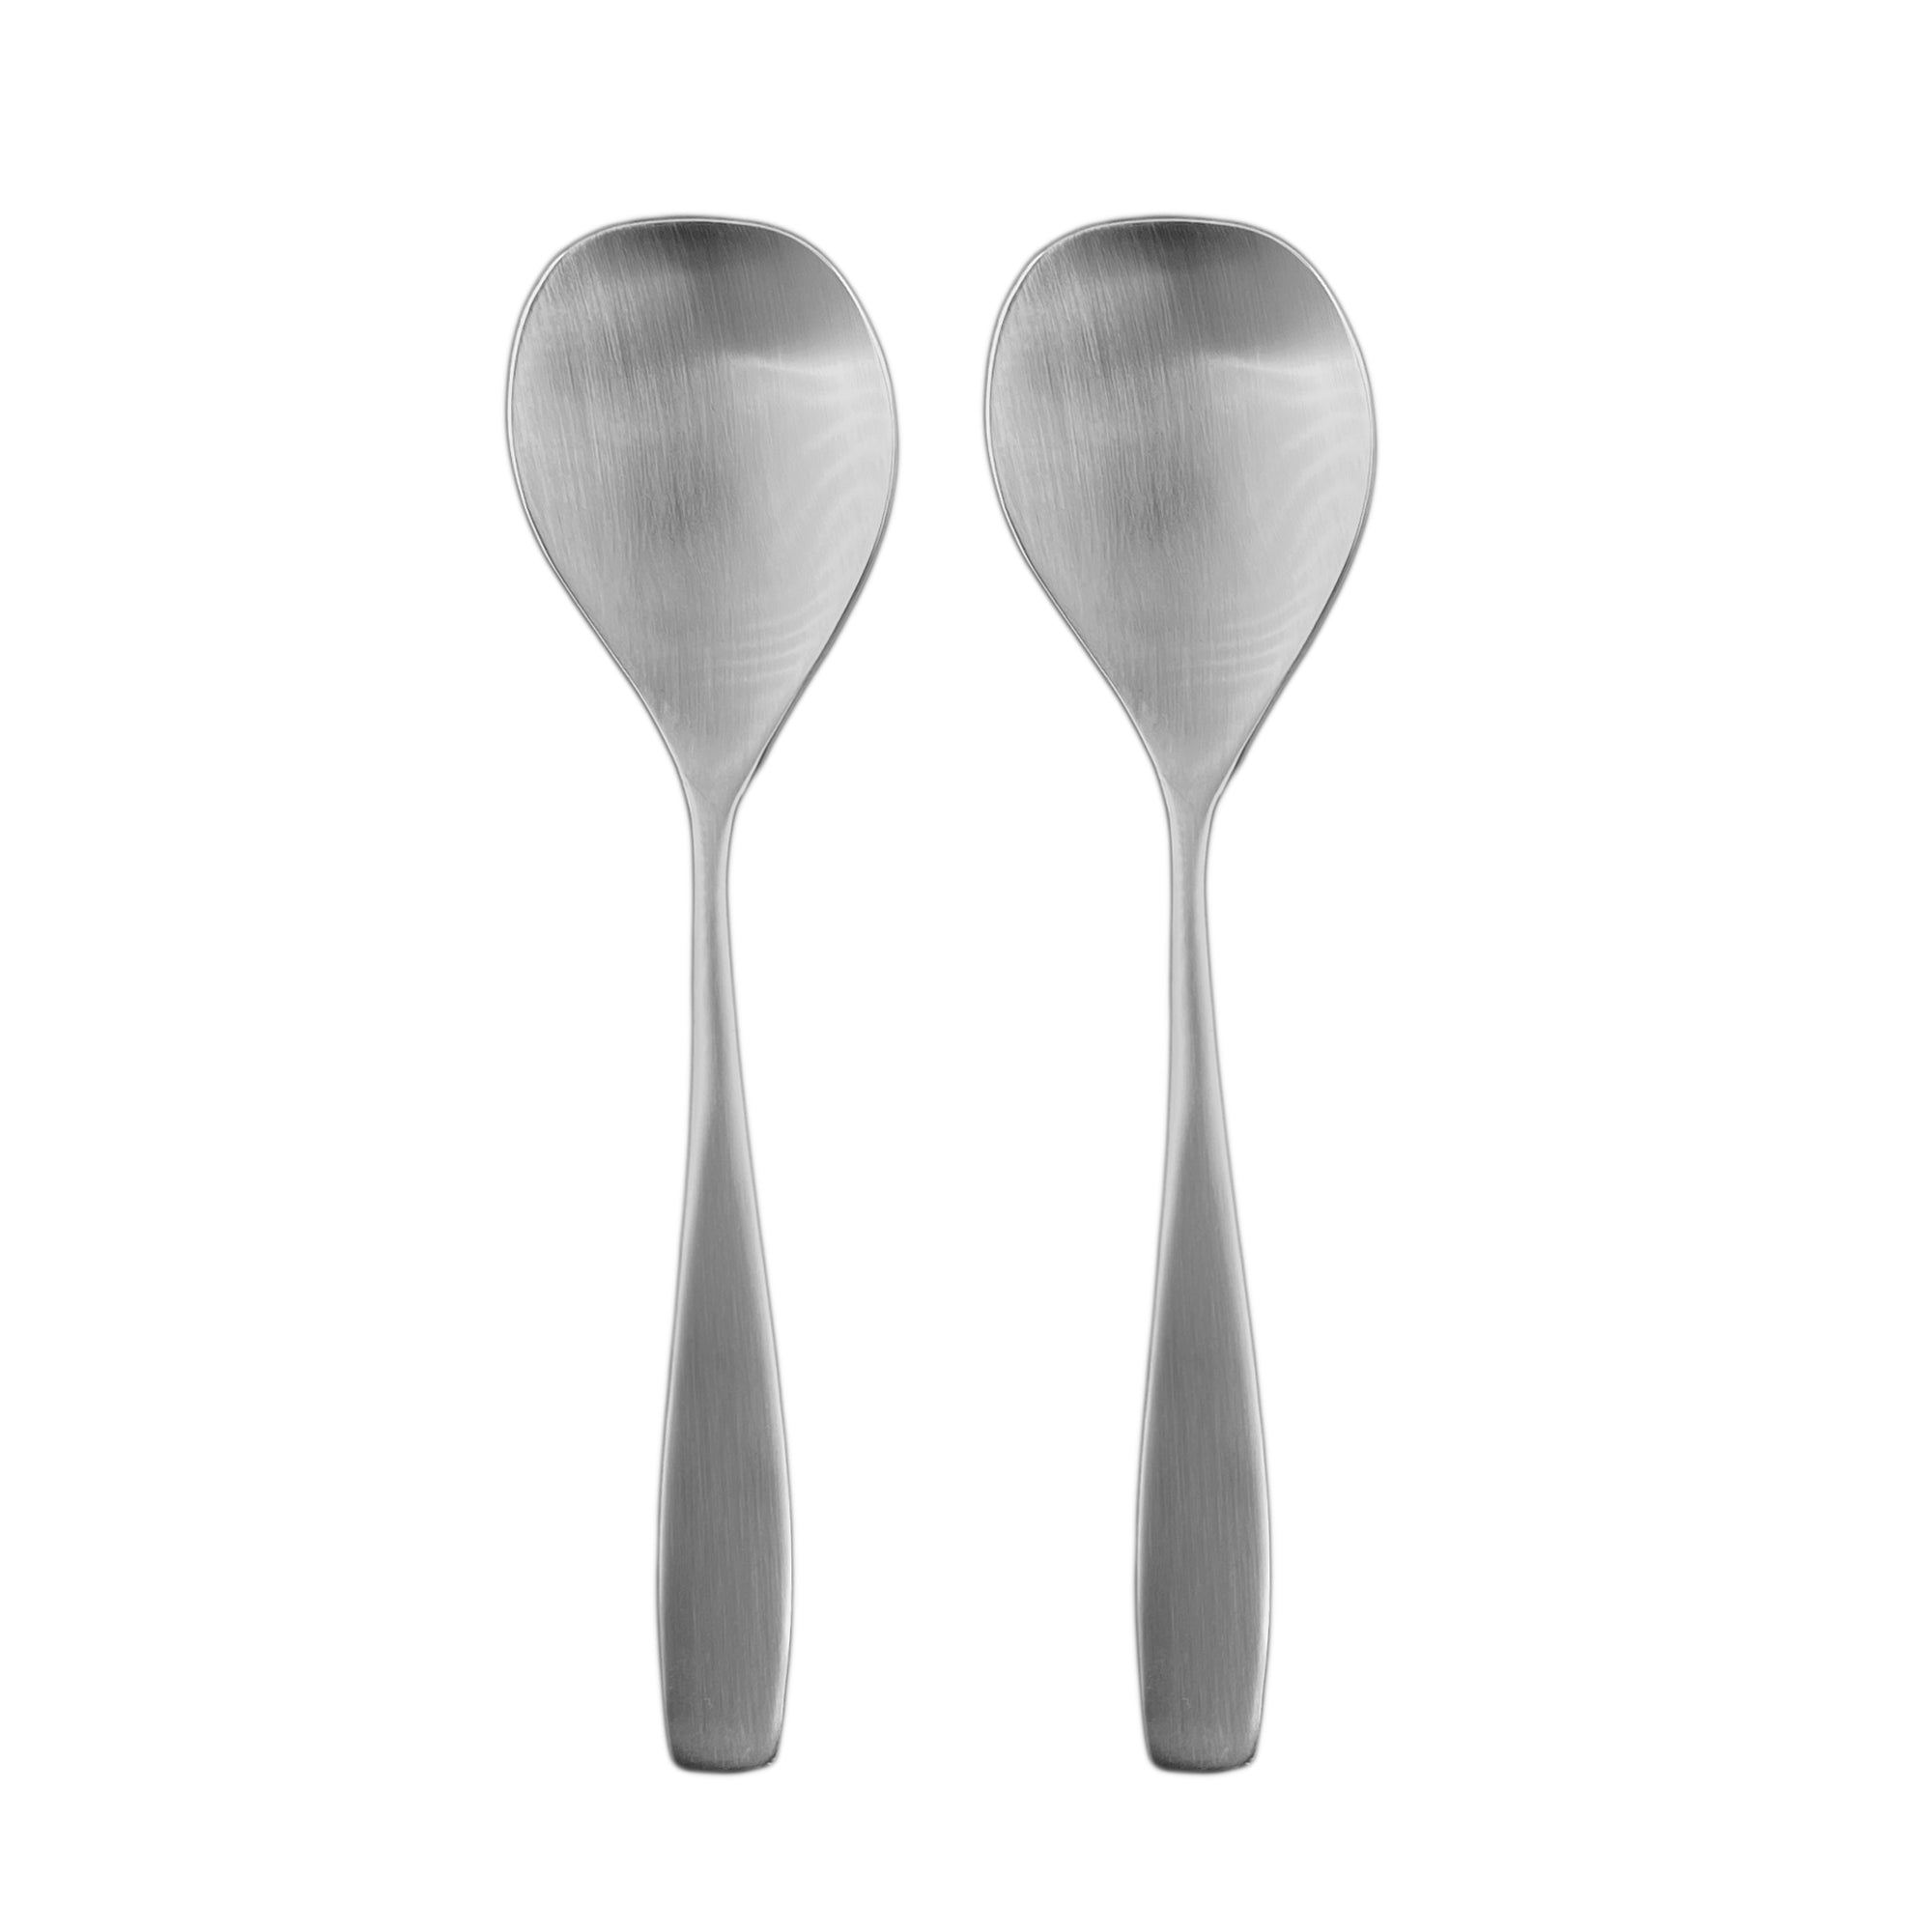 Voss Brushed Stainless Steel 2 Piece Serving Spoon Set